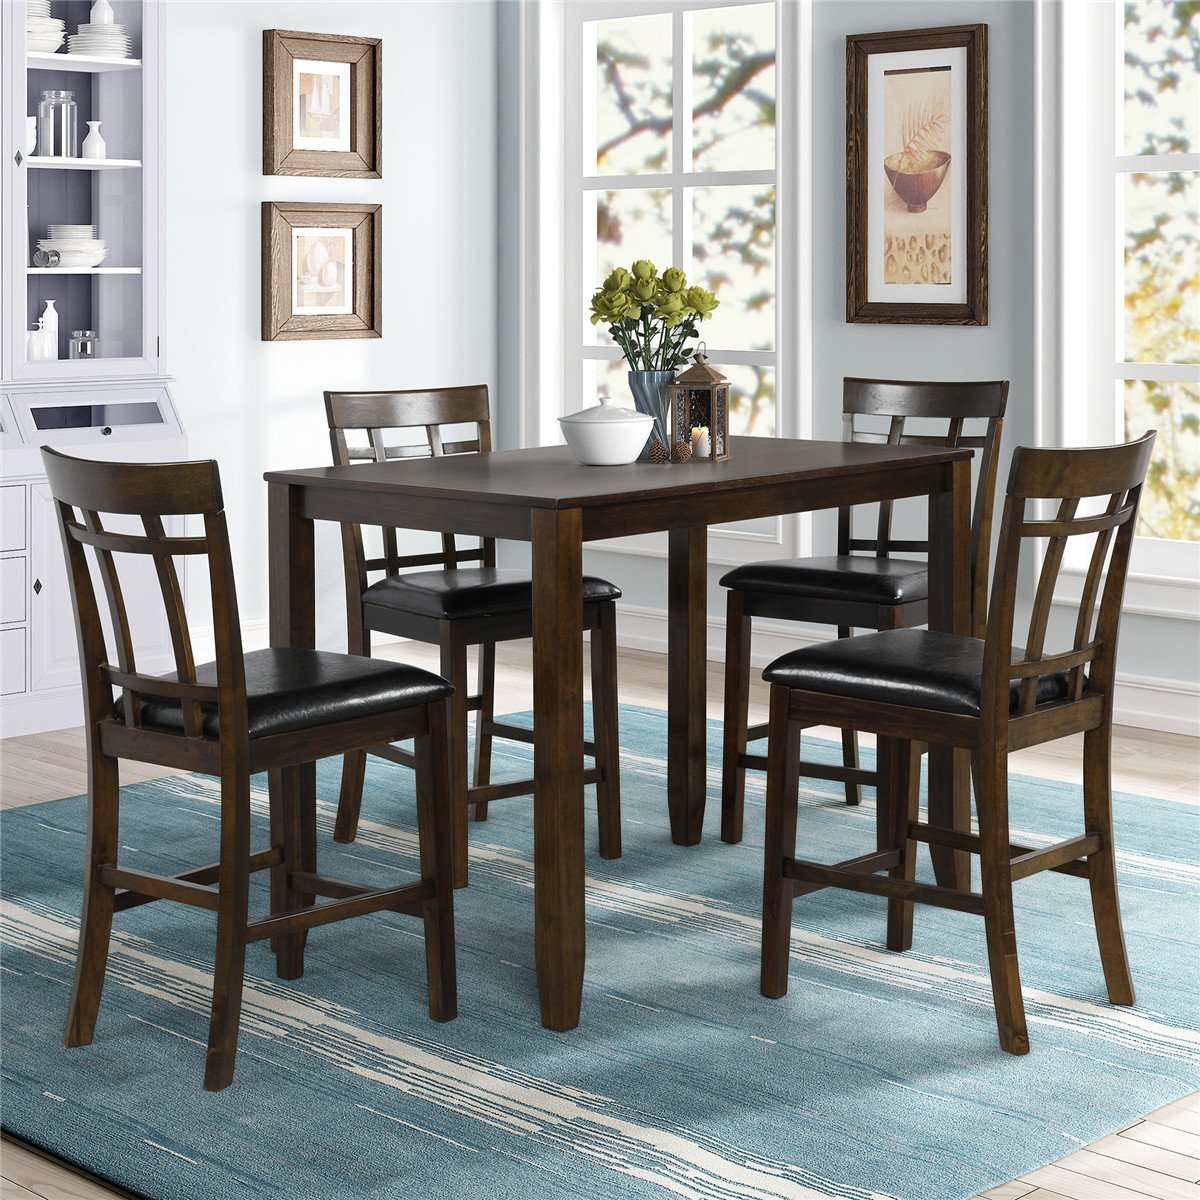 high dining room table and chairs